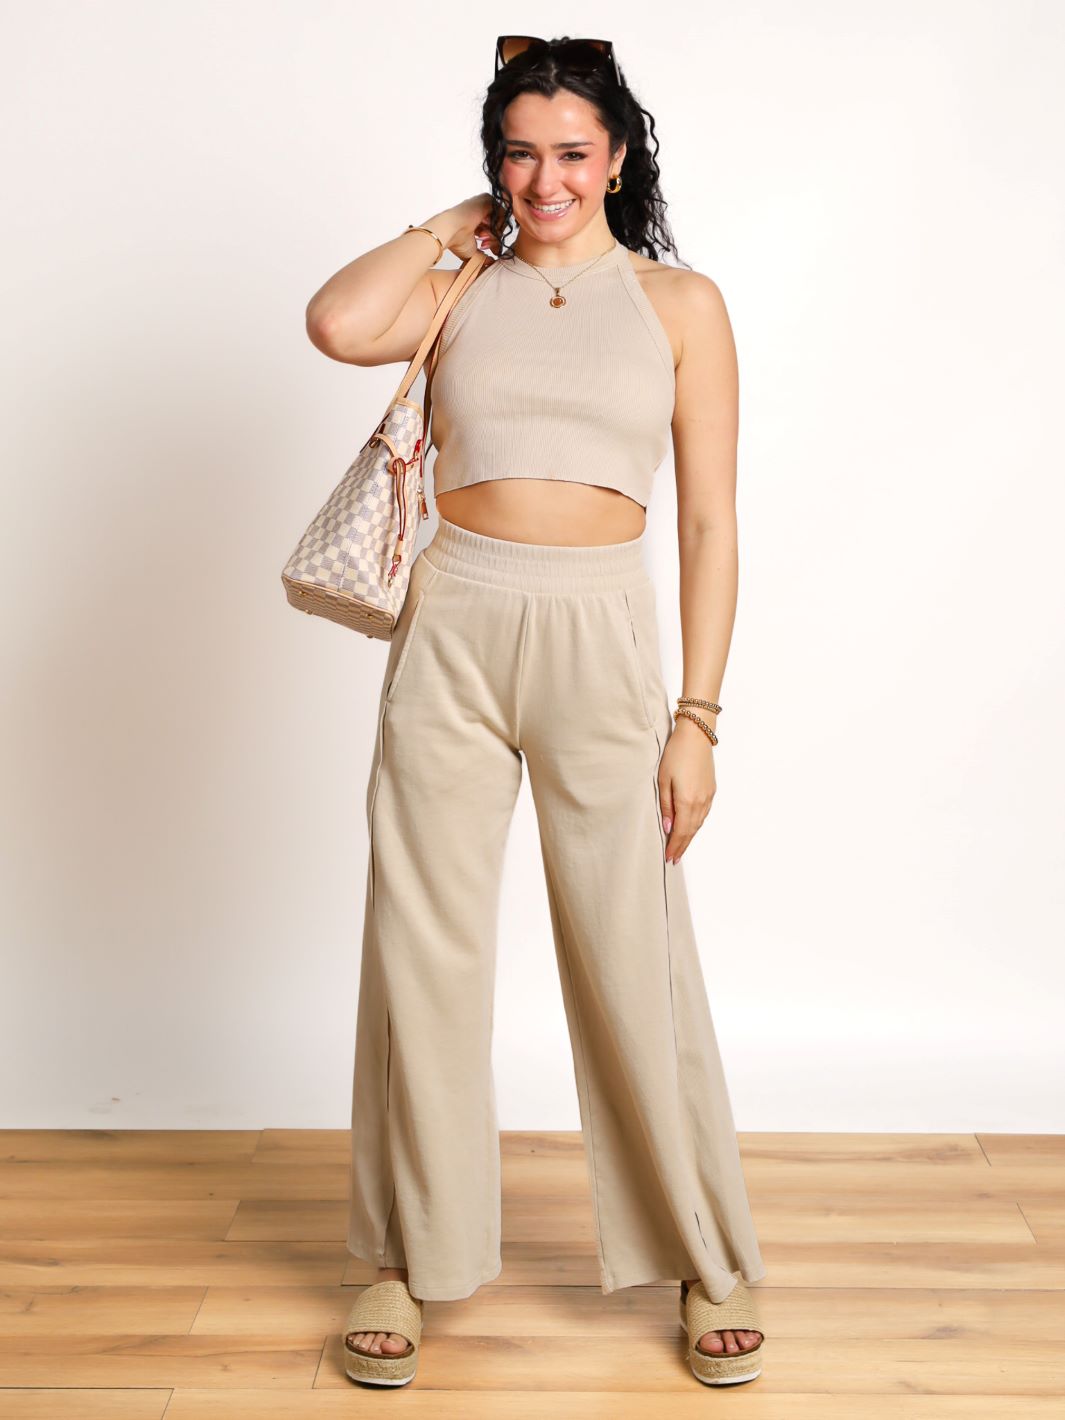 Believe Me Washed Wide Leg Lounge Pants